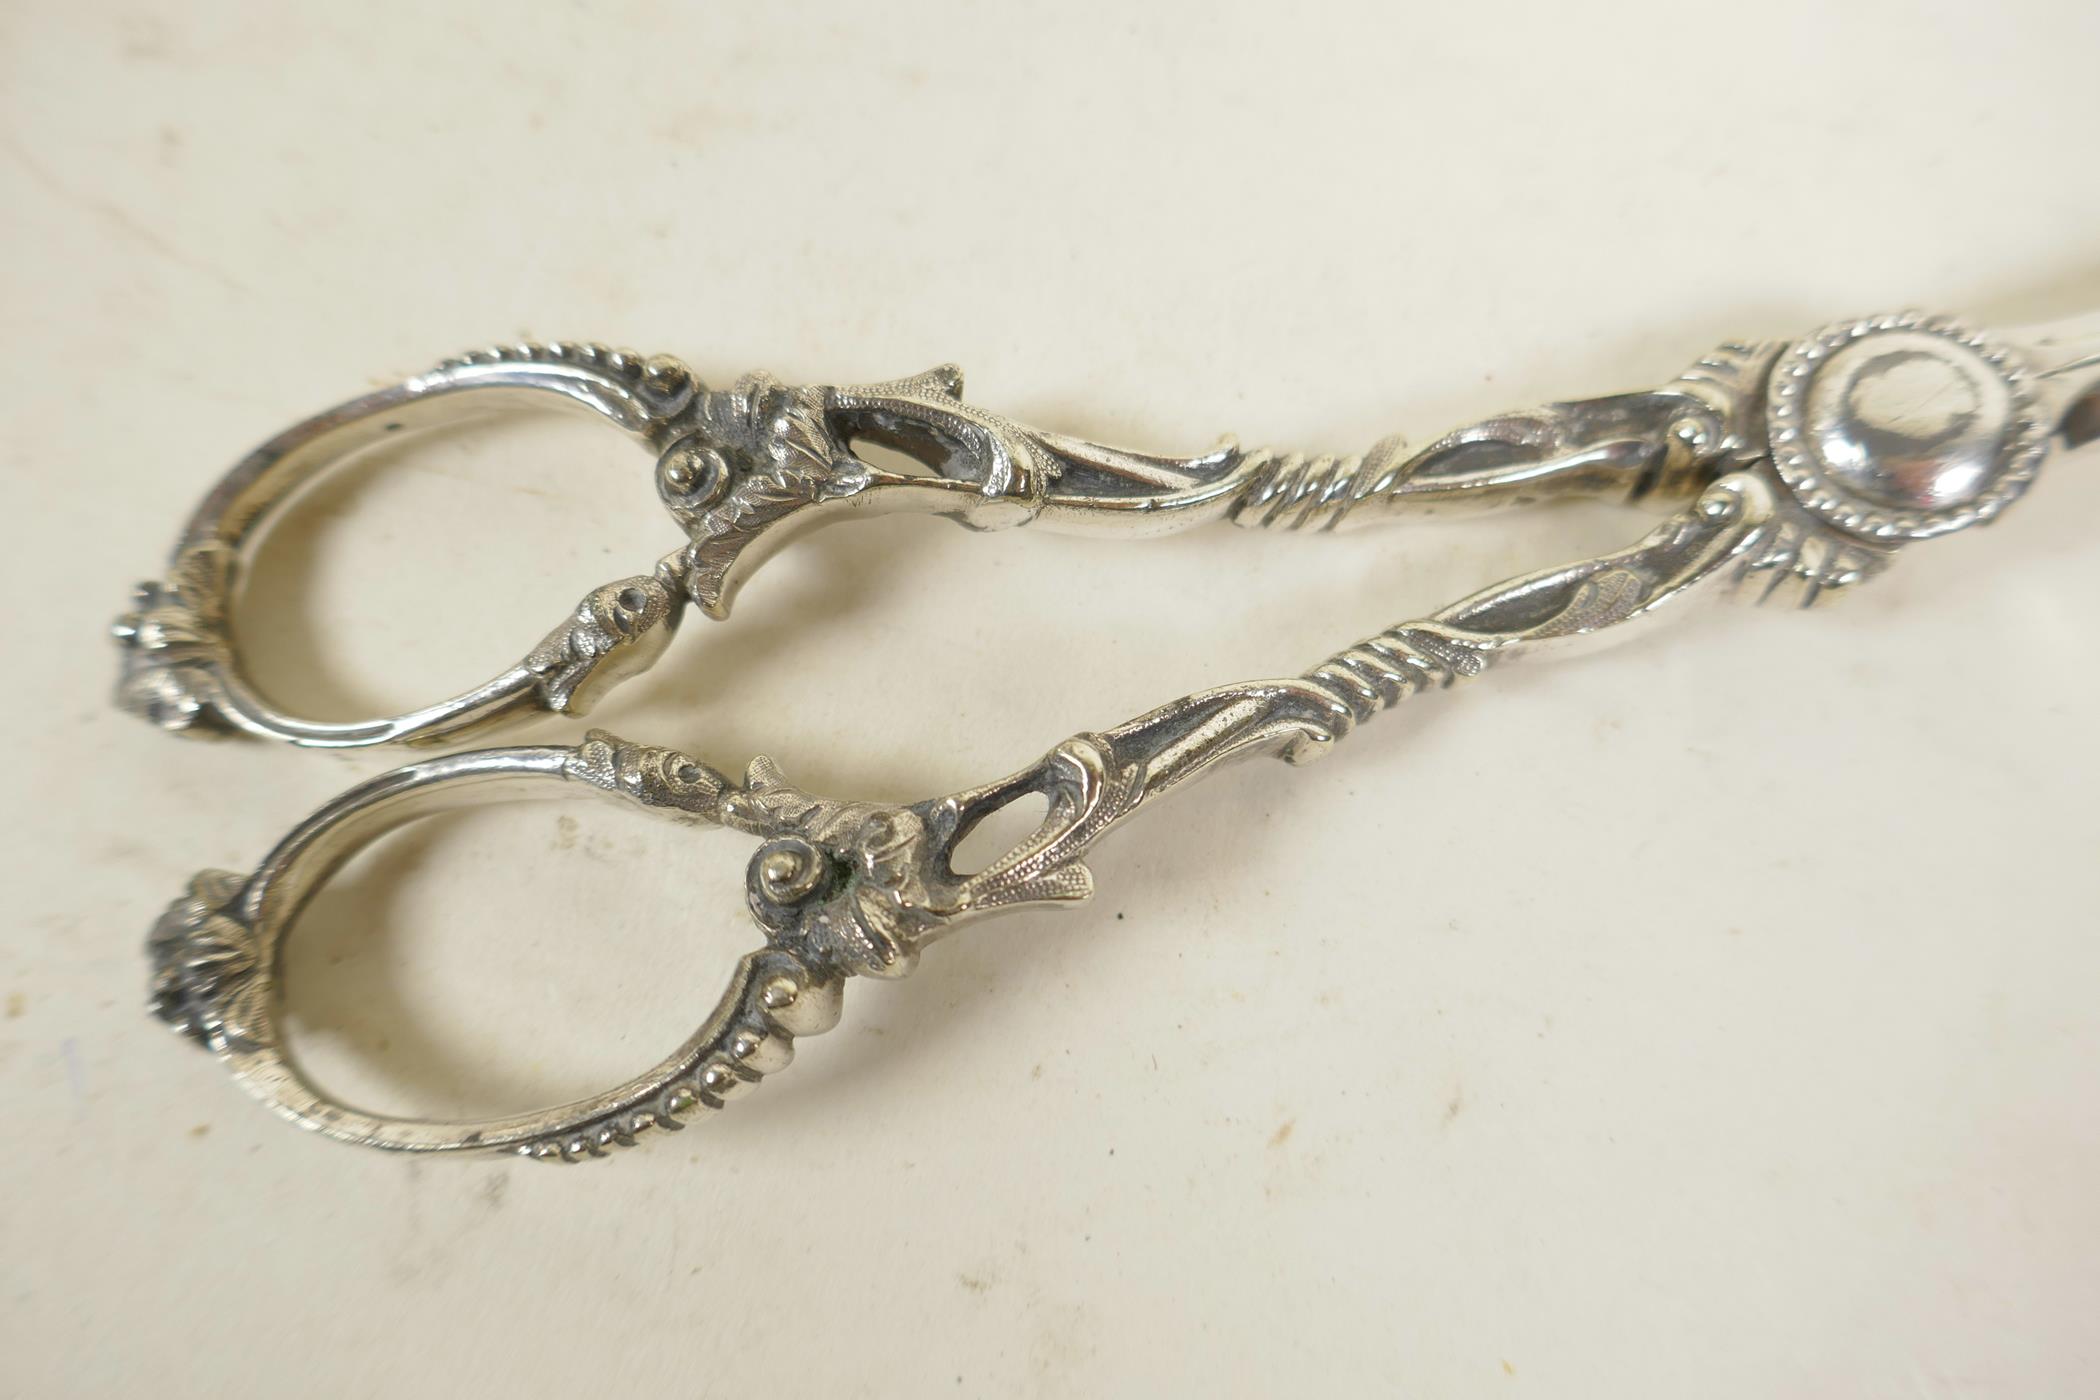 A pair of ornate silver plated grape scissors, 7" long - Image 2 of 2